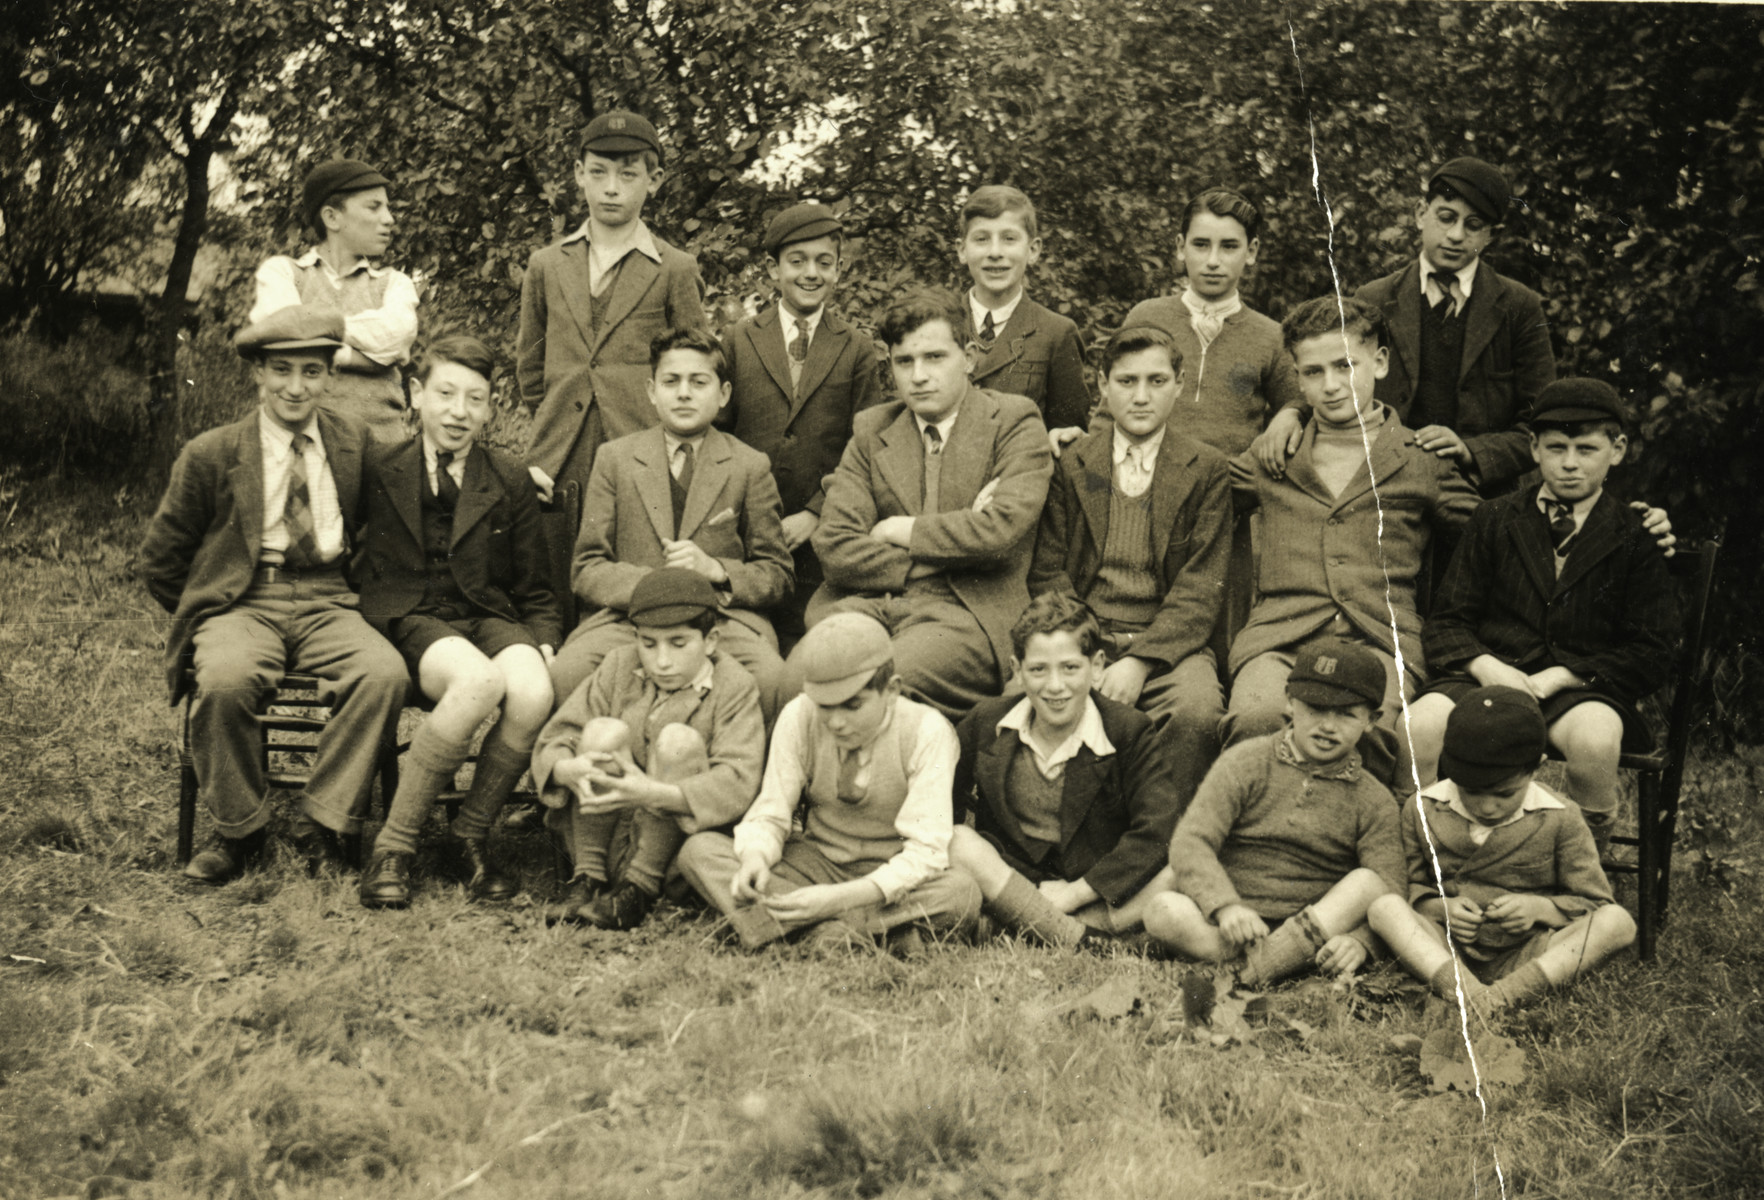 Portrait of school boys in Chase Terrace near Birmingham.

Gus Meyer who had come to England on a Kindertransport is in the middle row third from the right,